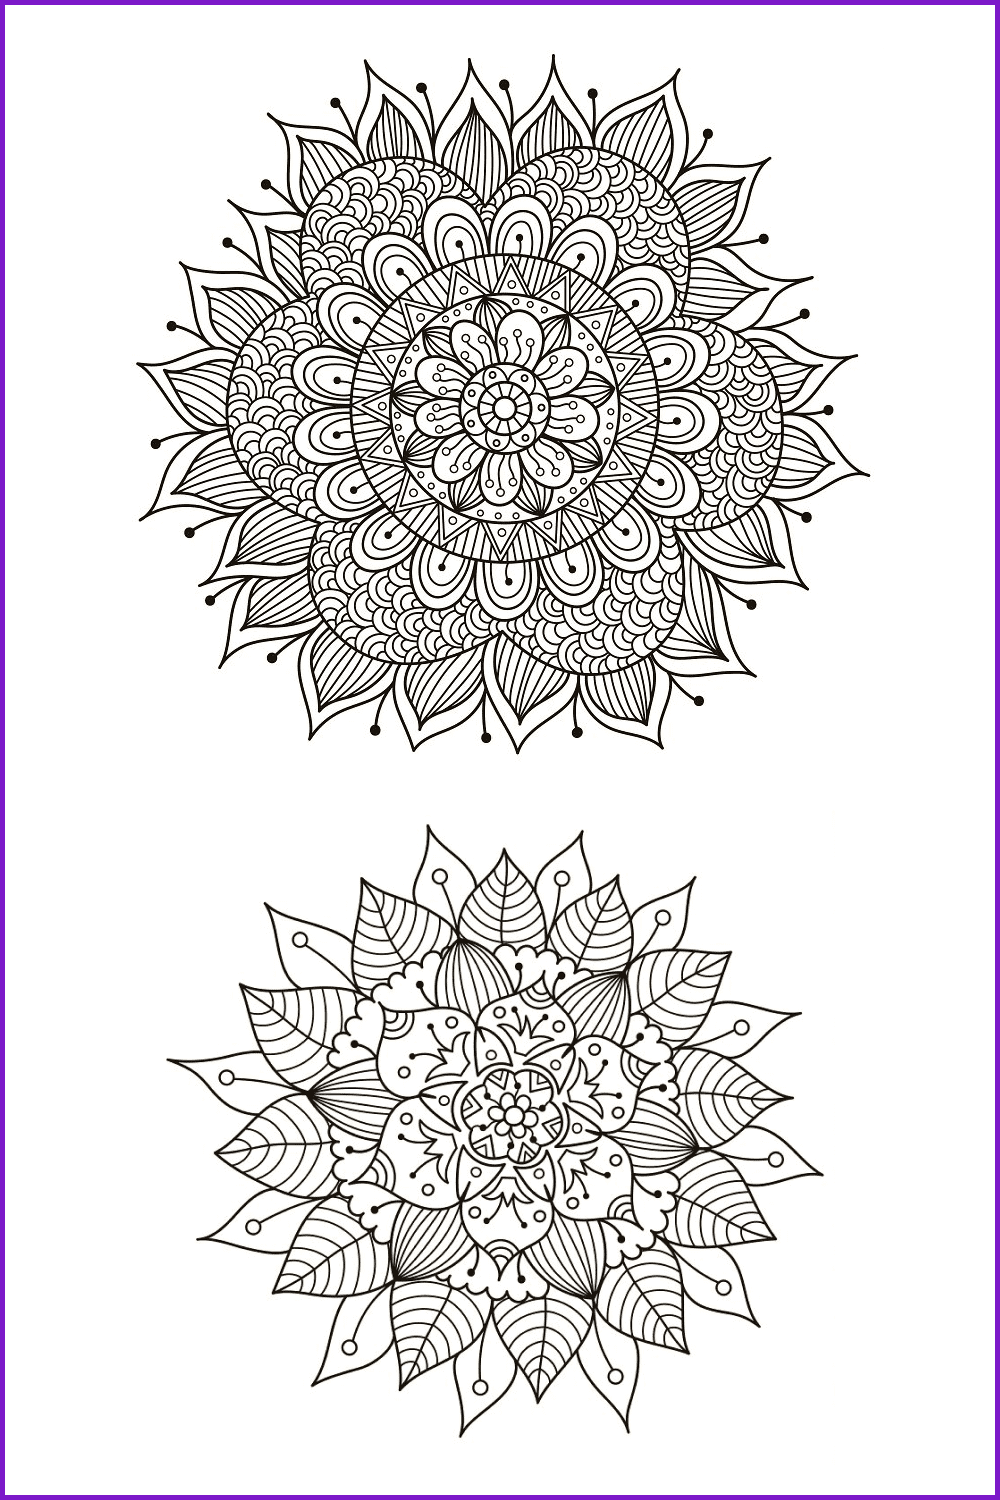 Vintage style mandala with many colors.